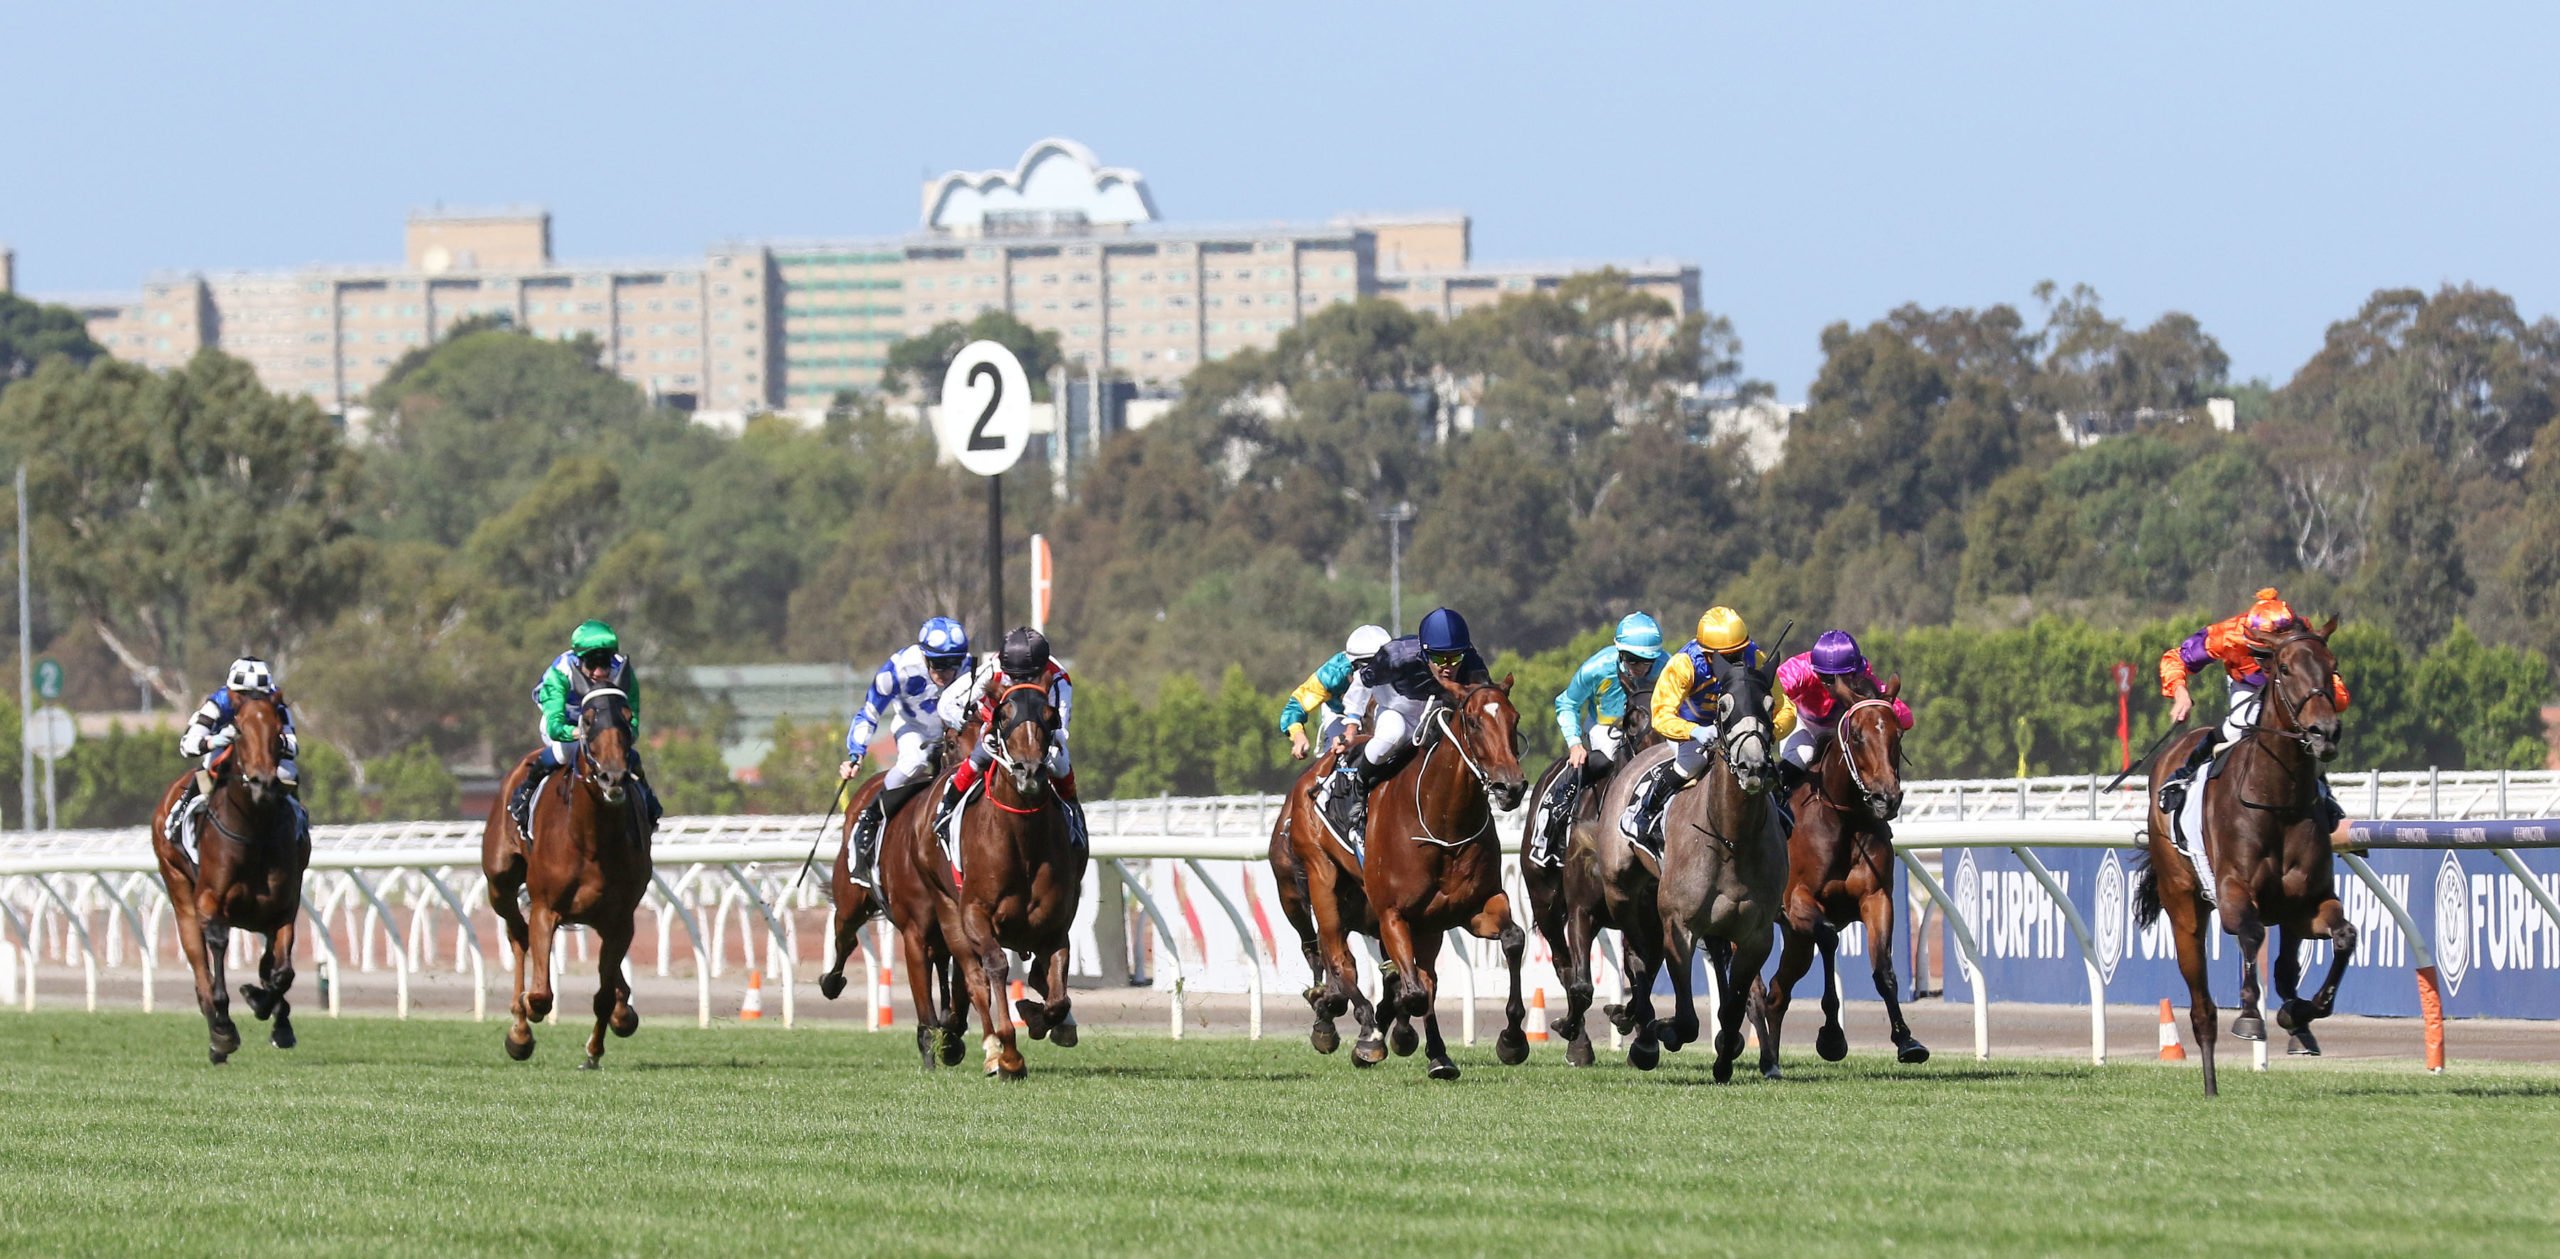 Prize money increase called for winter Finals Day at Flemington races